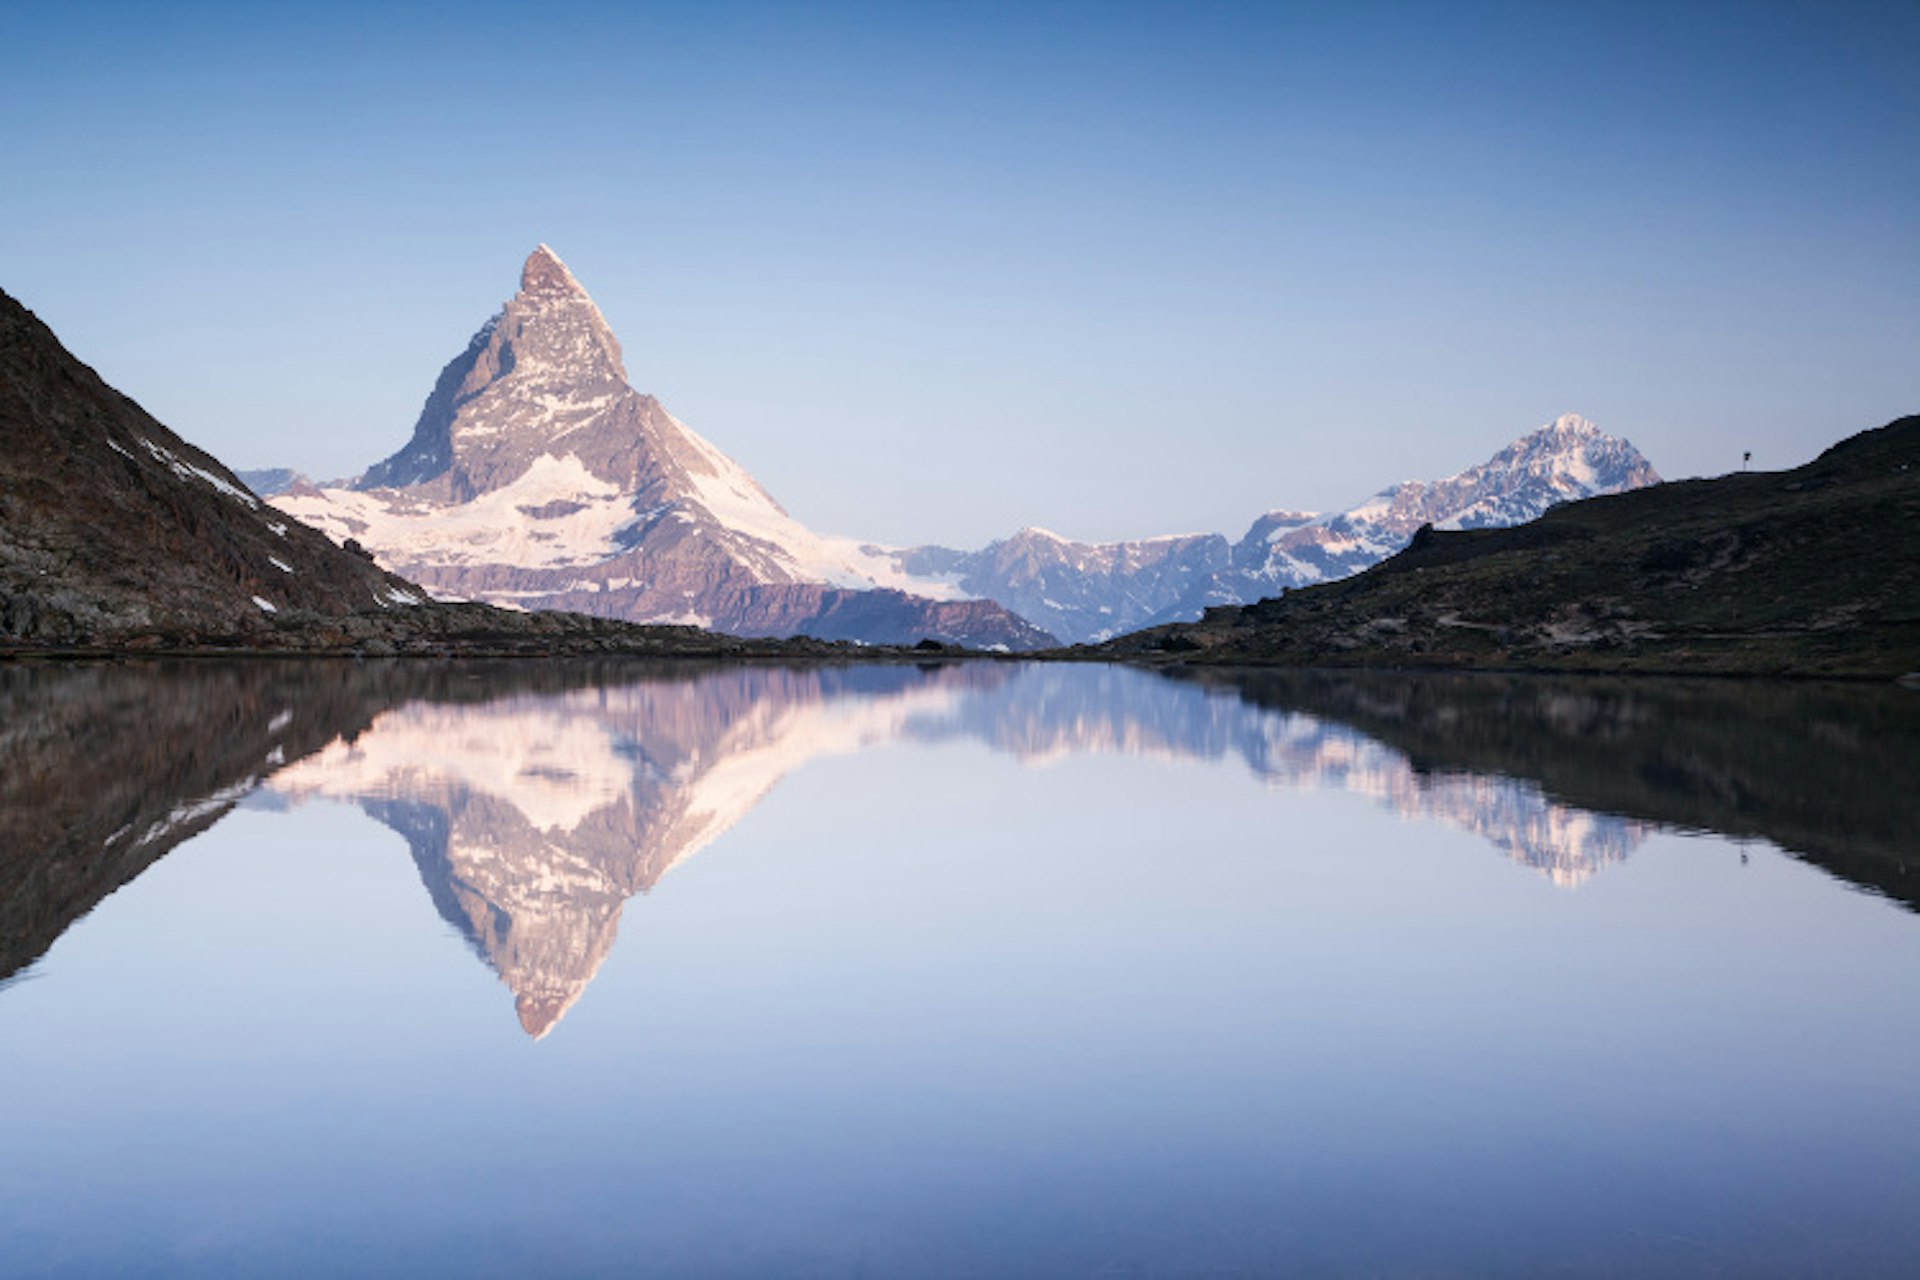 The Matterhorn is at its best when reflecting off Lake Riffelsee. Image by Matteo Colombo/Photostock/Getty